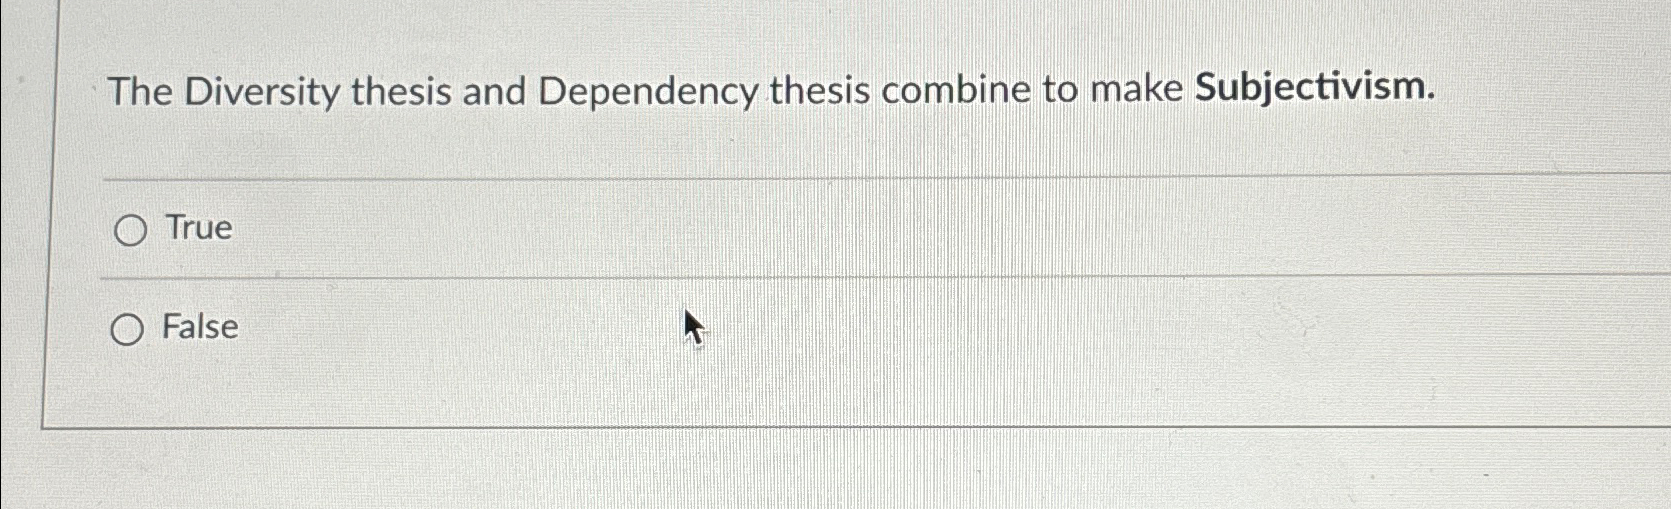 diversity and dependency thesis